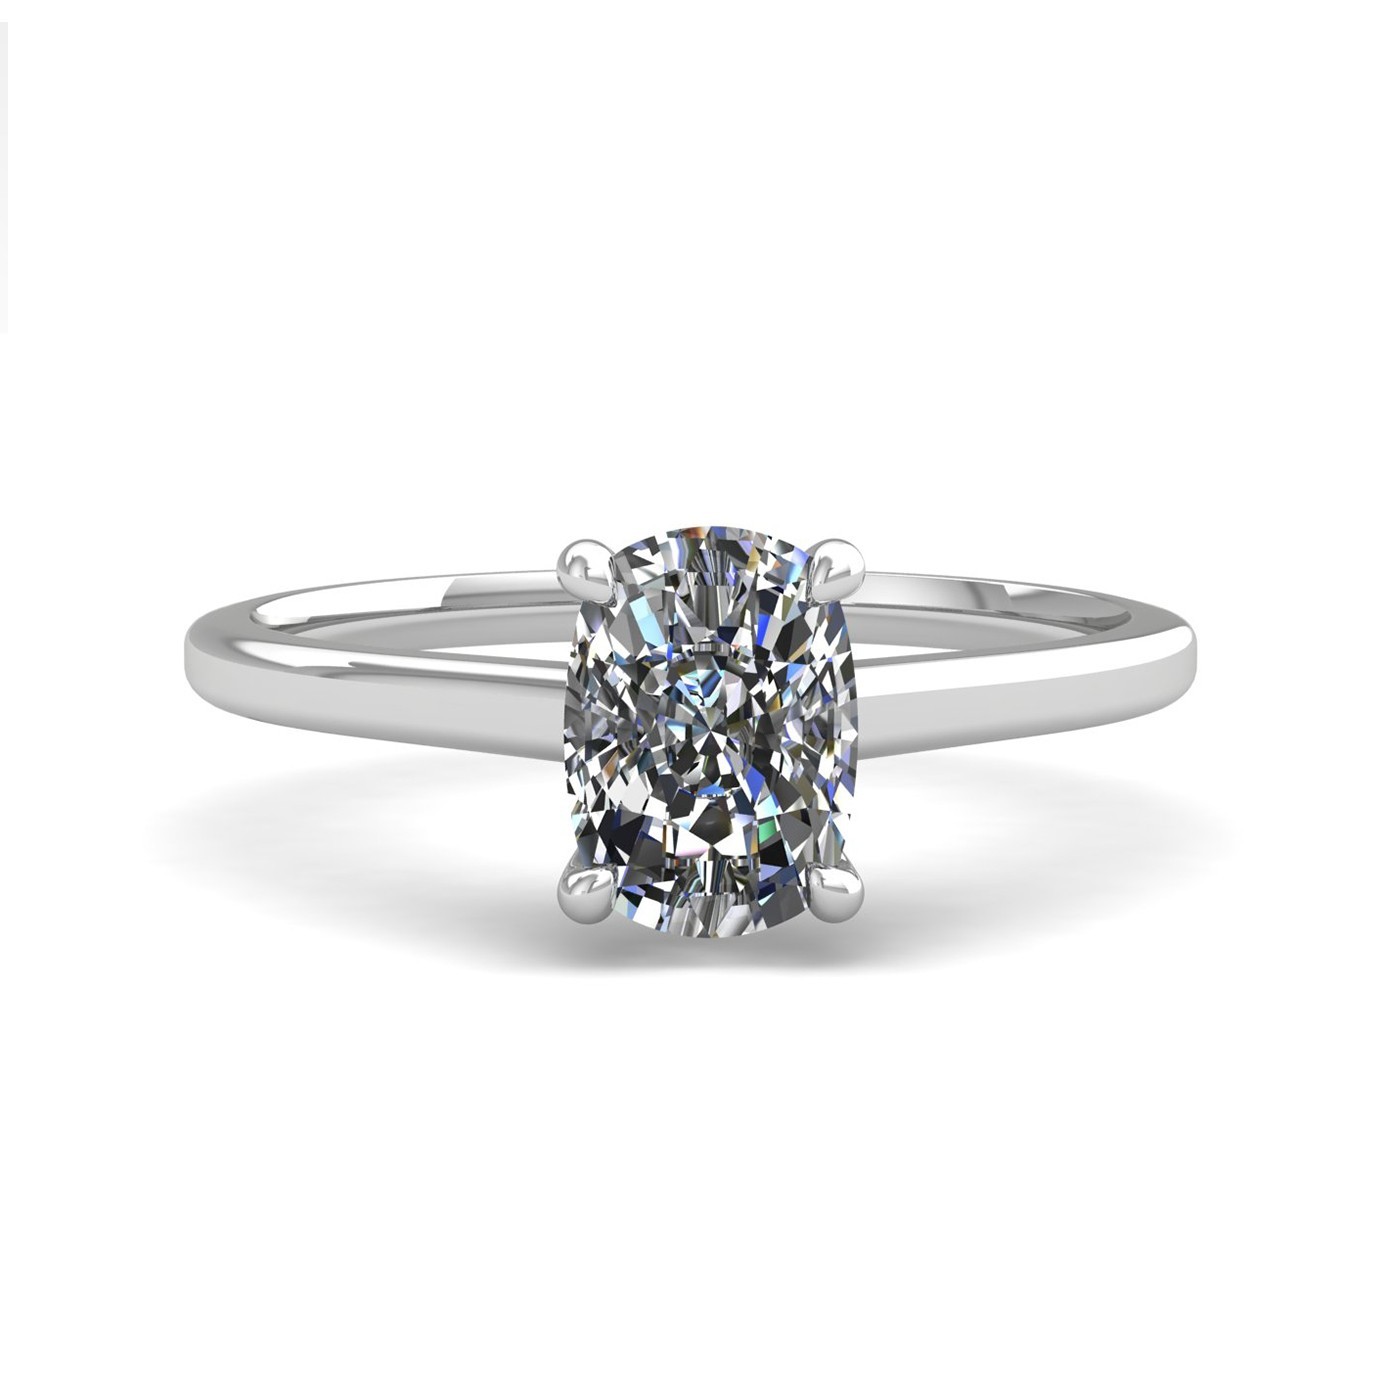 18k white gold  2.00 ct 4 prongs solitaire elongated cushion cut diamond engagement ring with whisper thin band Photos & images